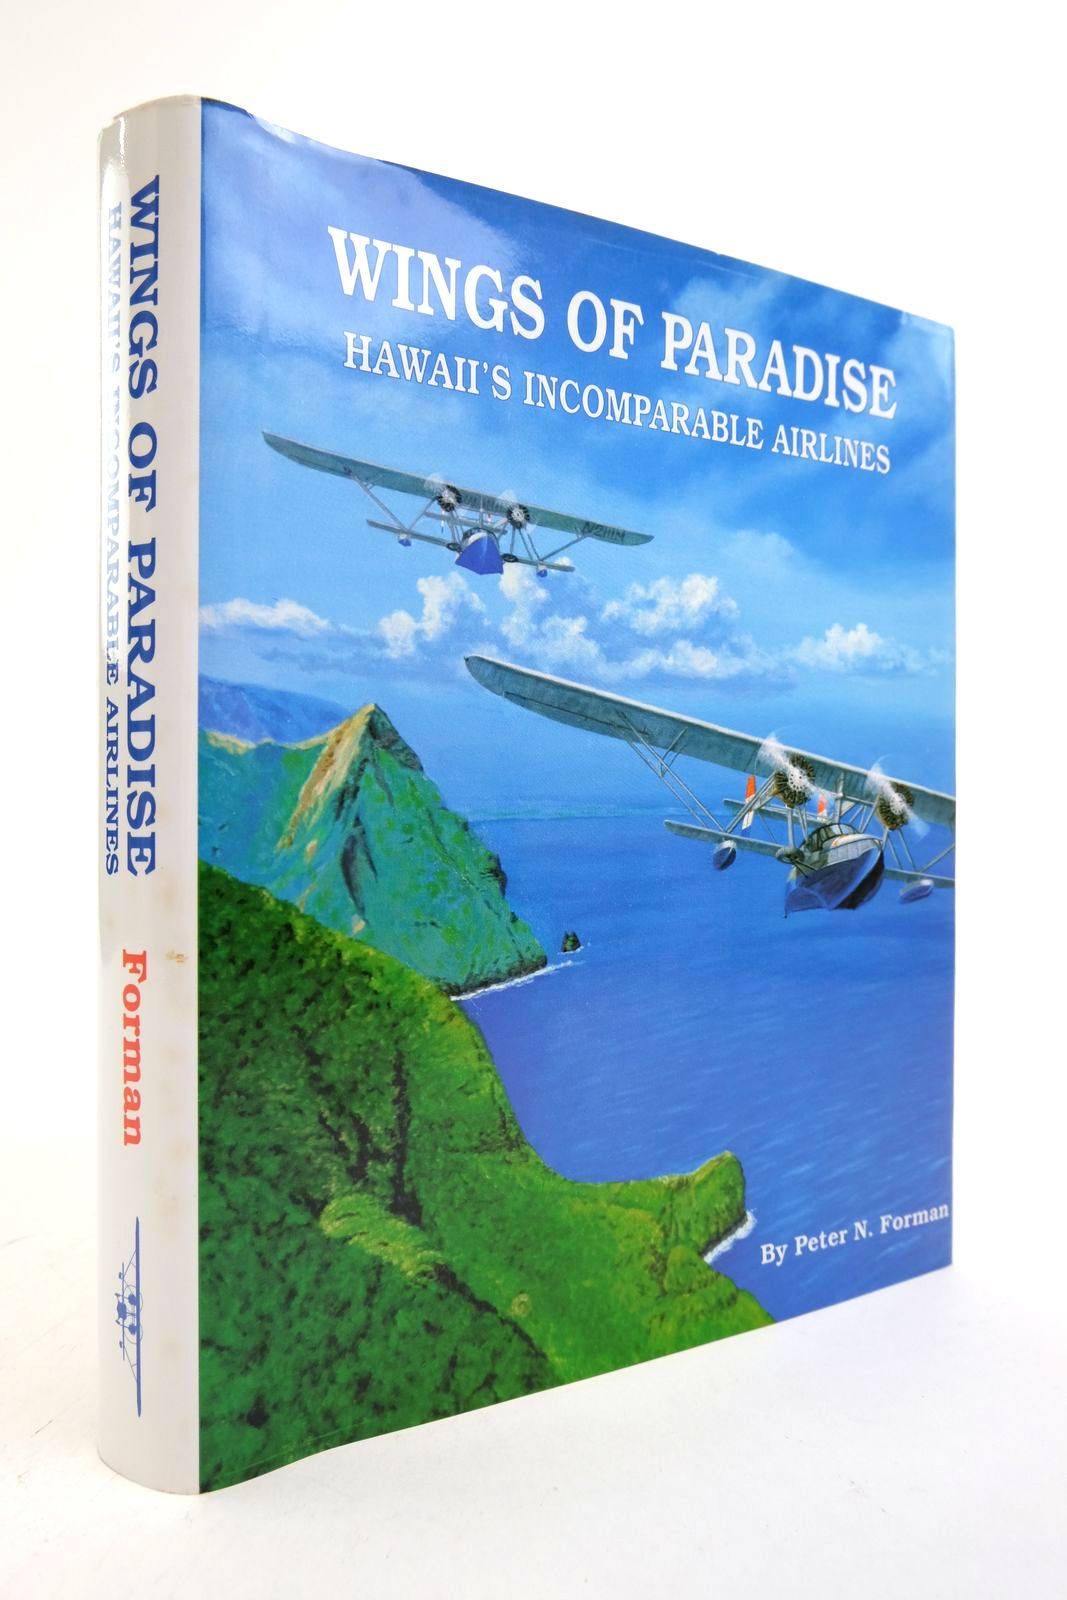 Photo of WINGS OF PARADISE: HAWAII'S INCOMPARABLE AIRLINES written by Forman, Peter N. published by Barnstormer Books (STOCK CODE: 2139310)  for sale by Stella & Rose's Books